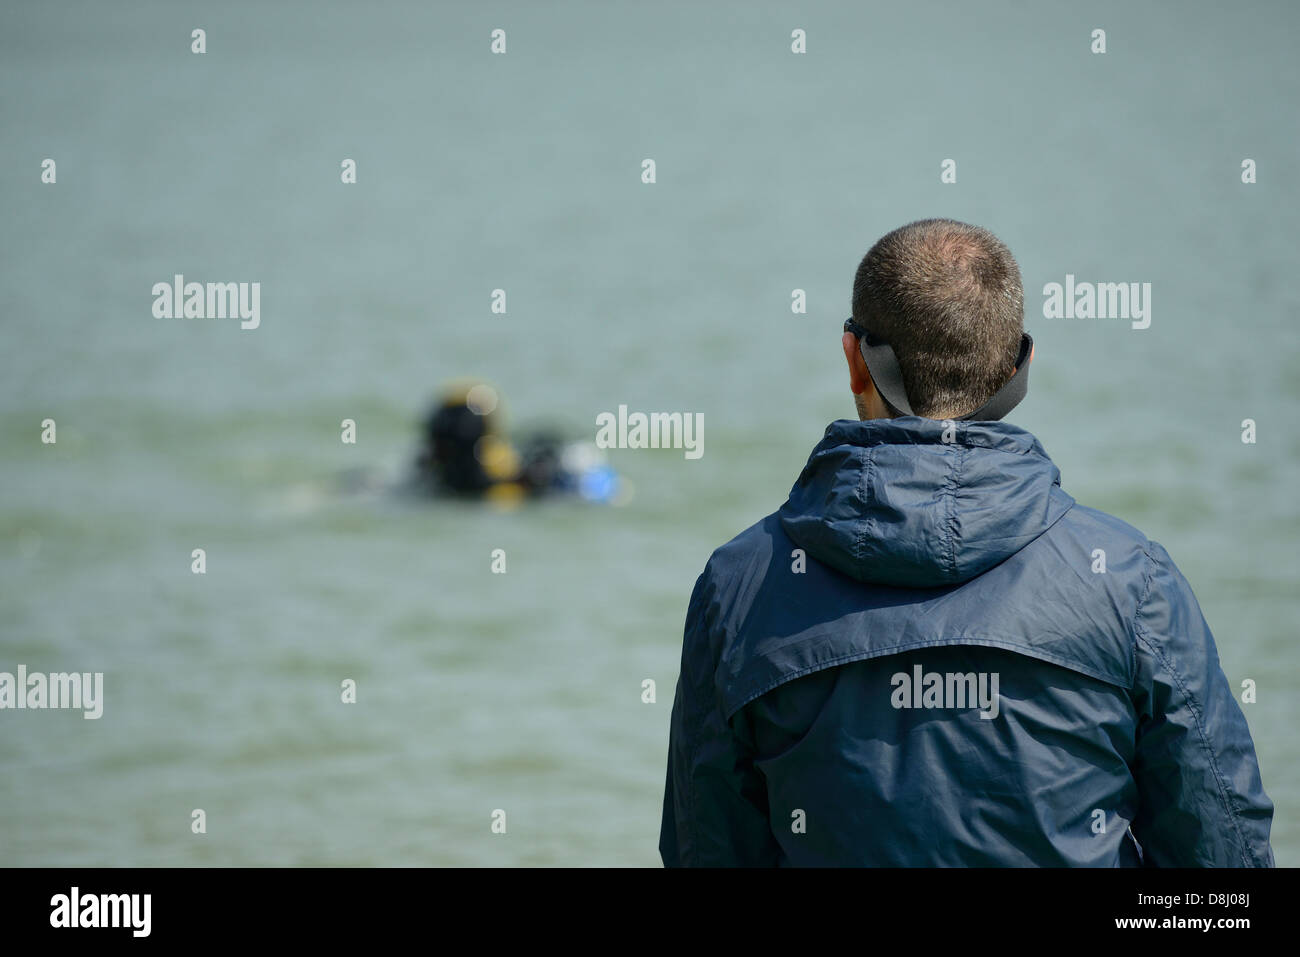 Male spectator watching a diver in the background Stock Photo